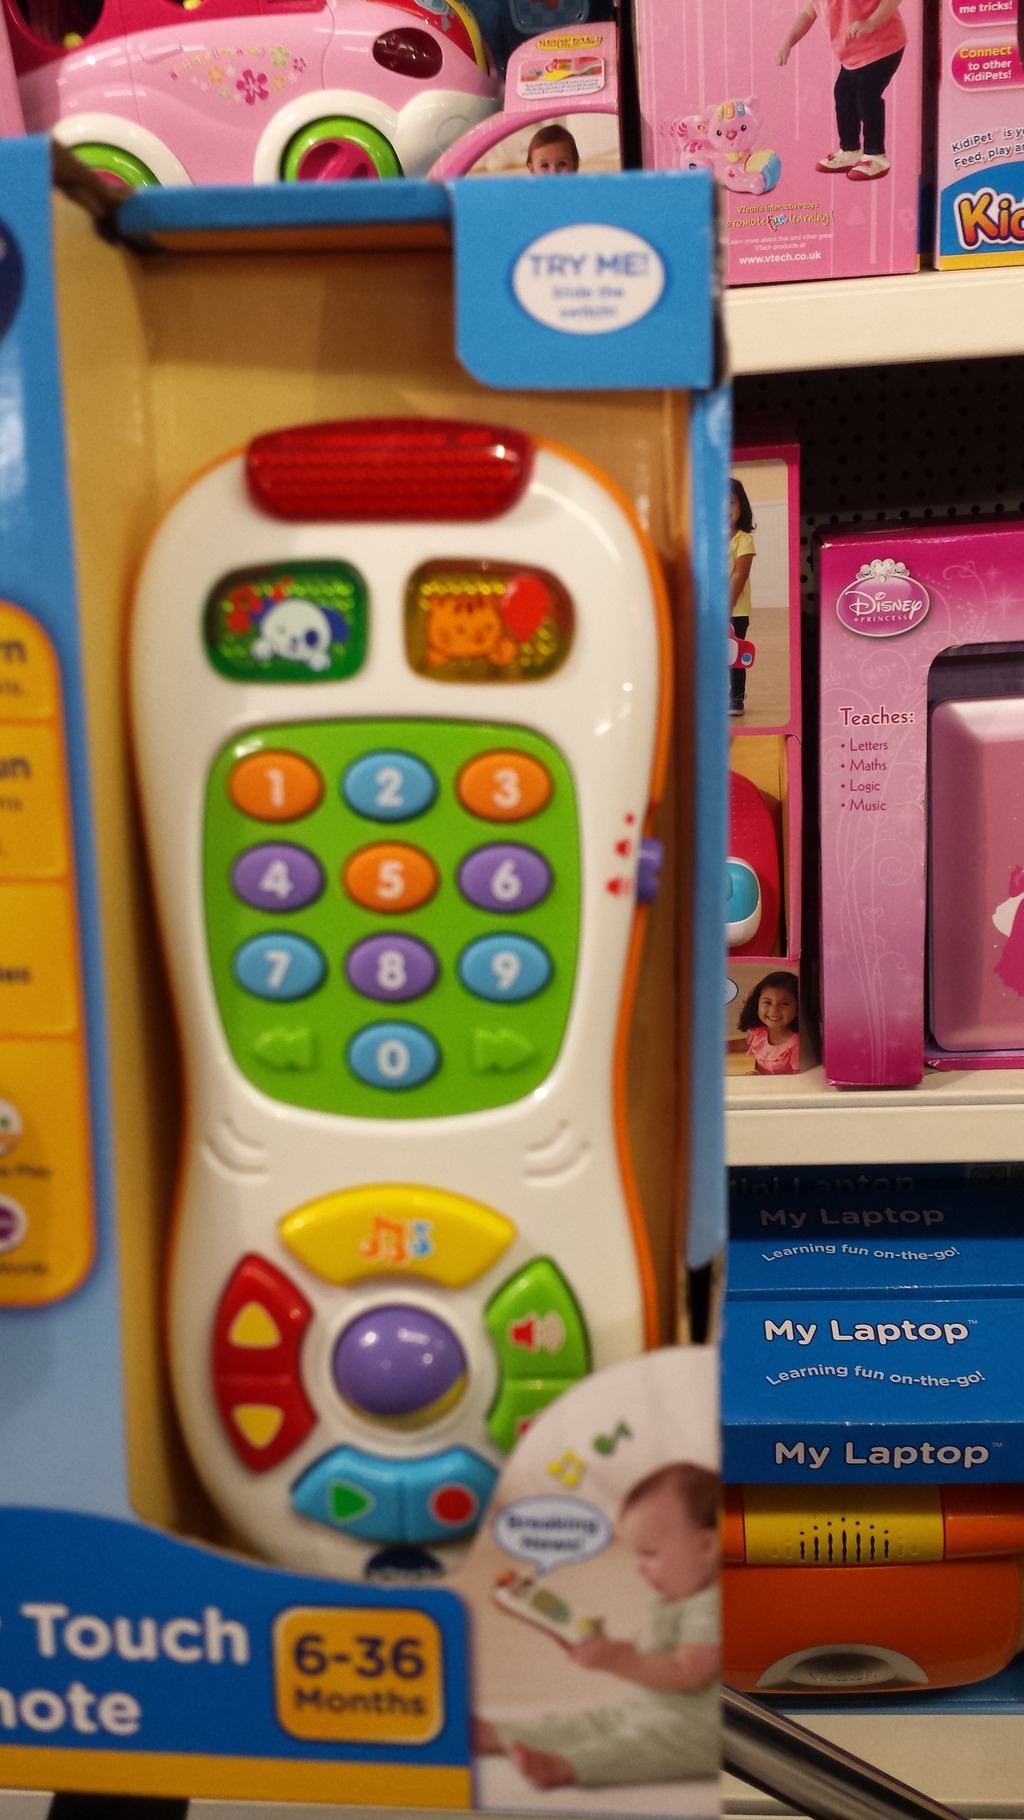 toy phones that look real